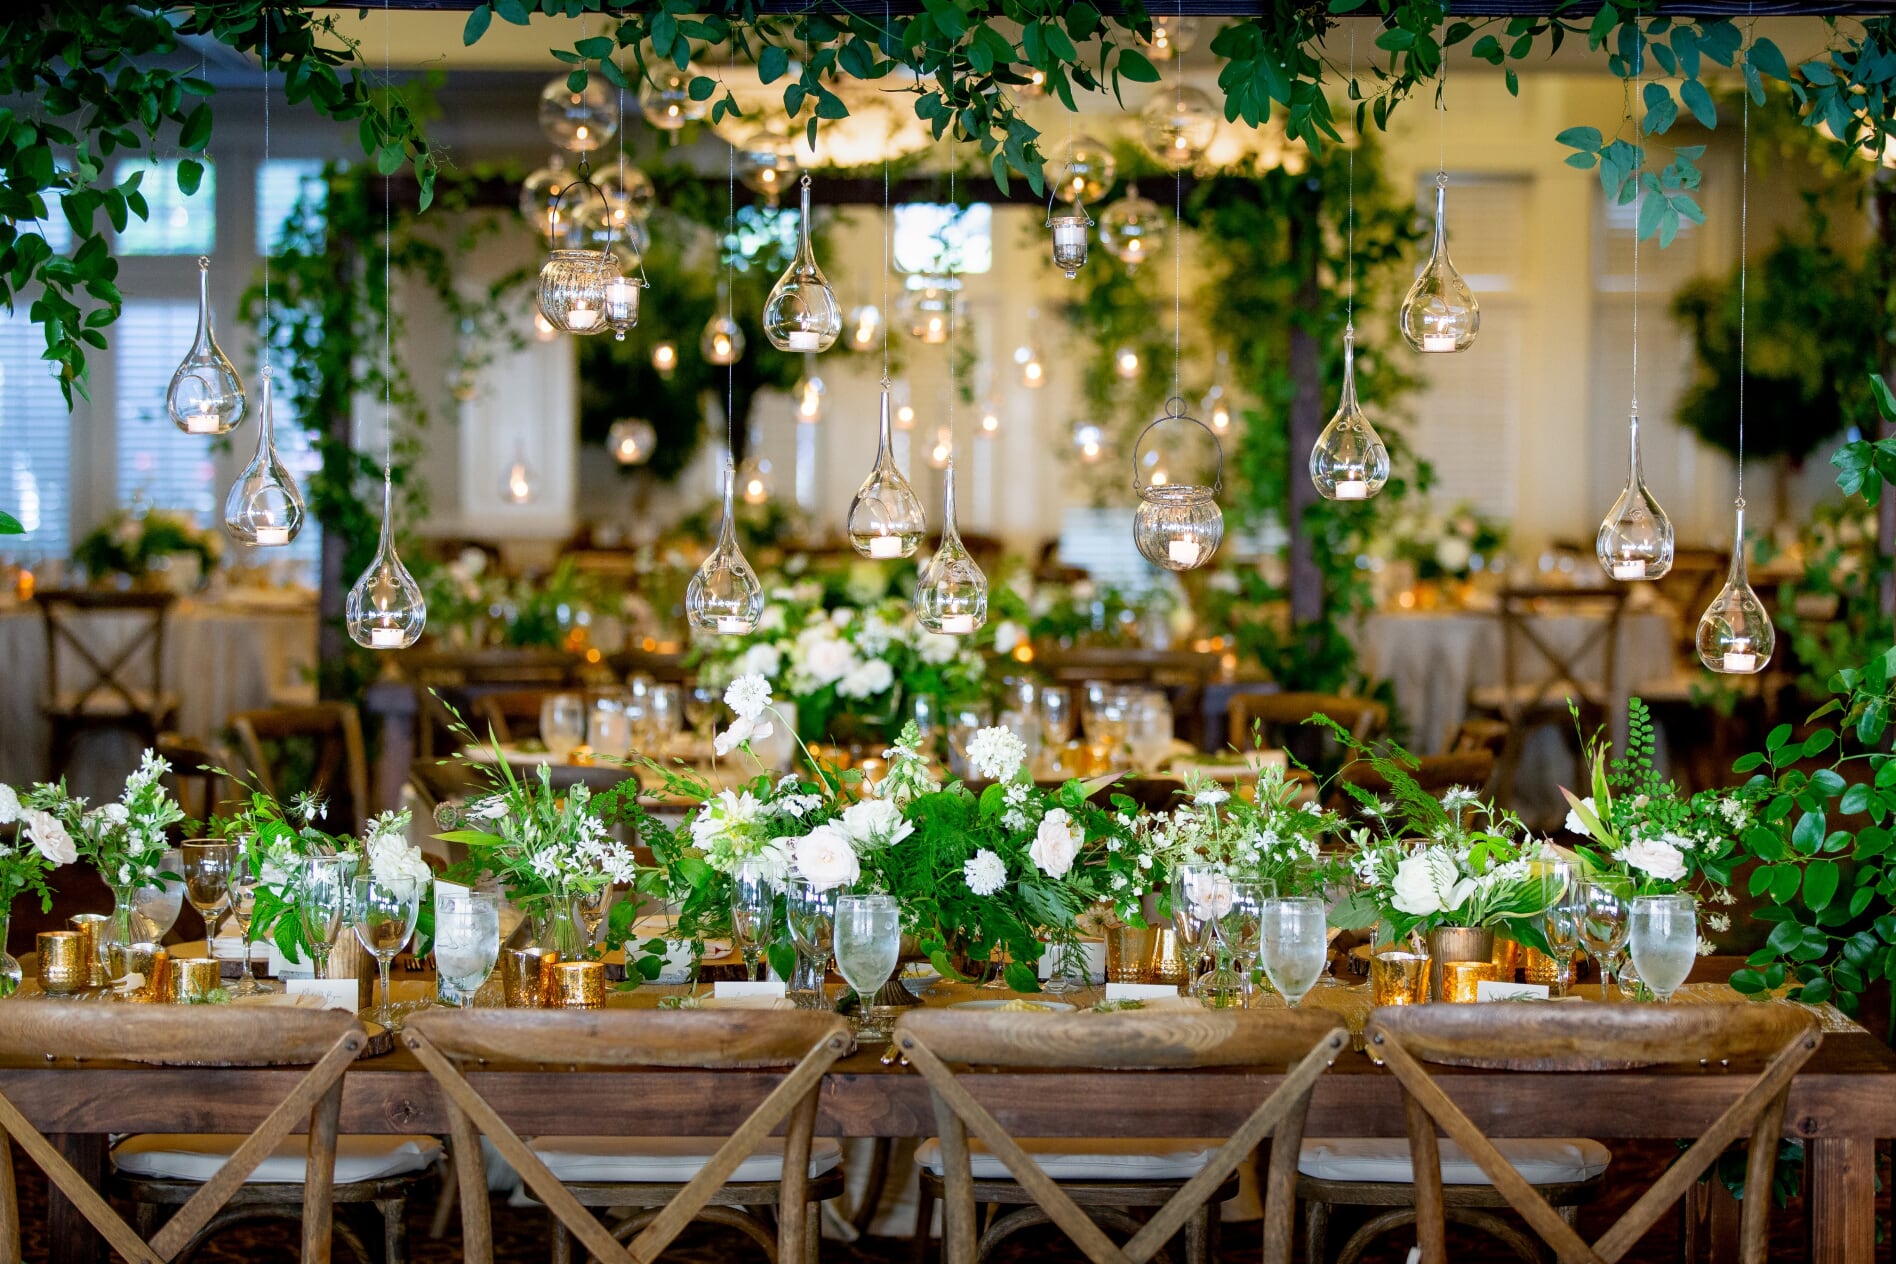 Long wooden table with hanging candles and greenery at this Midsummer Night's Dream Wedding designed by Flora Nova Design